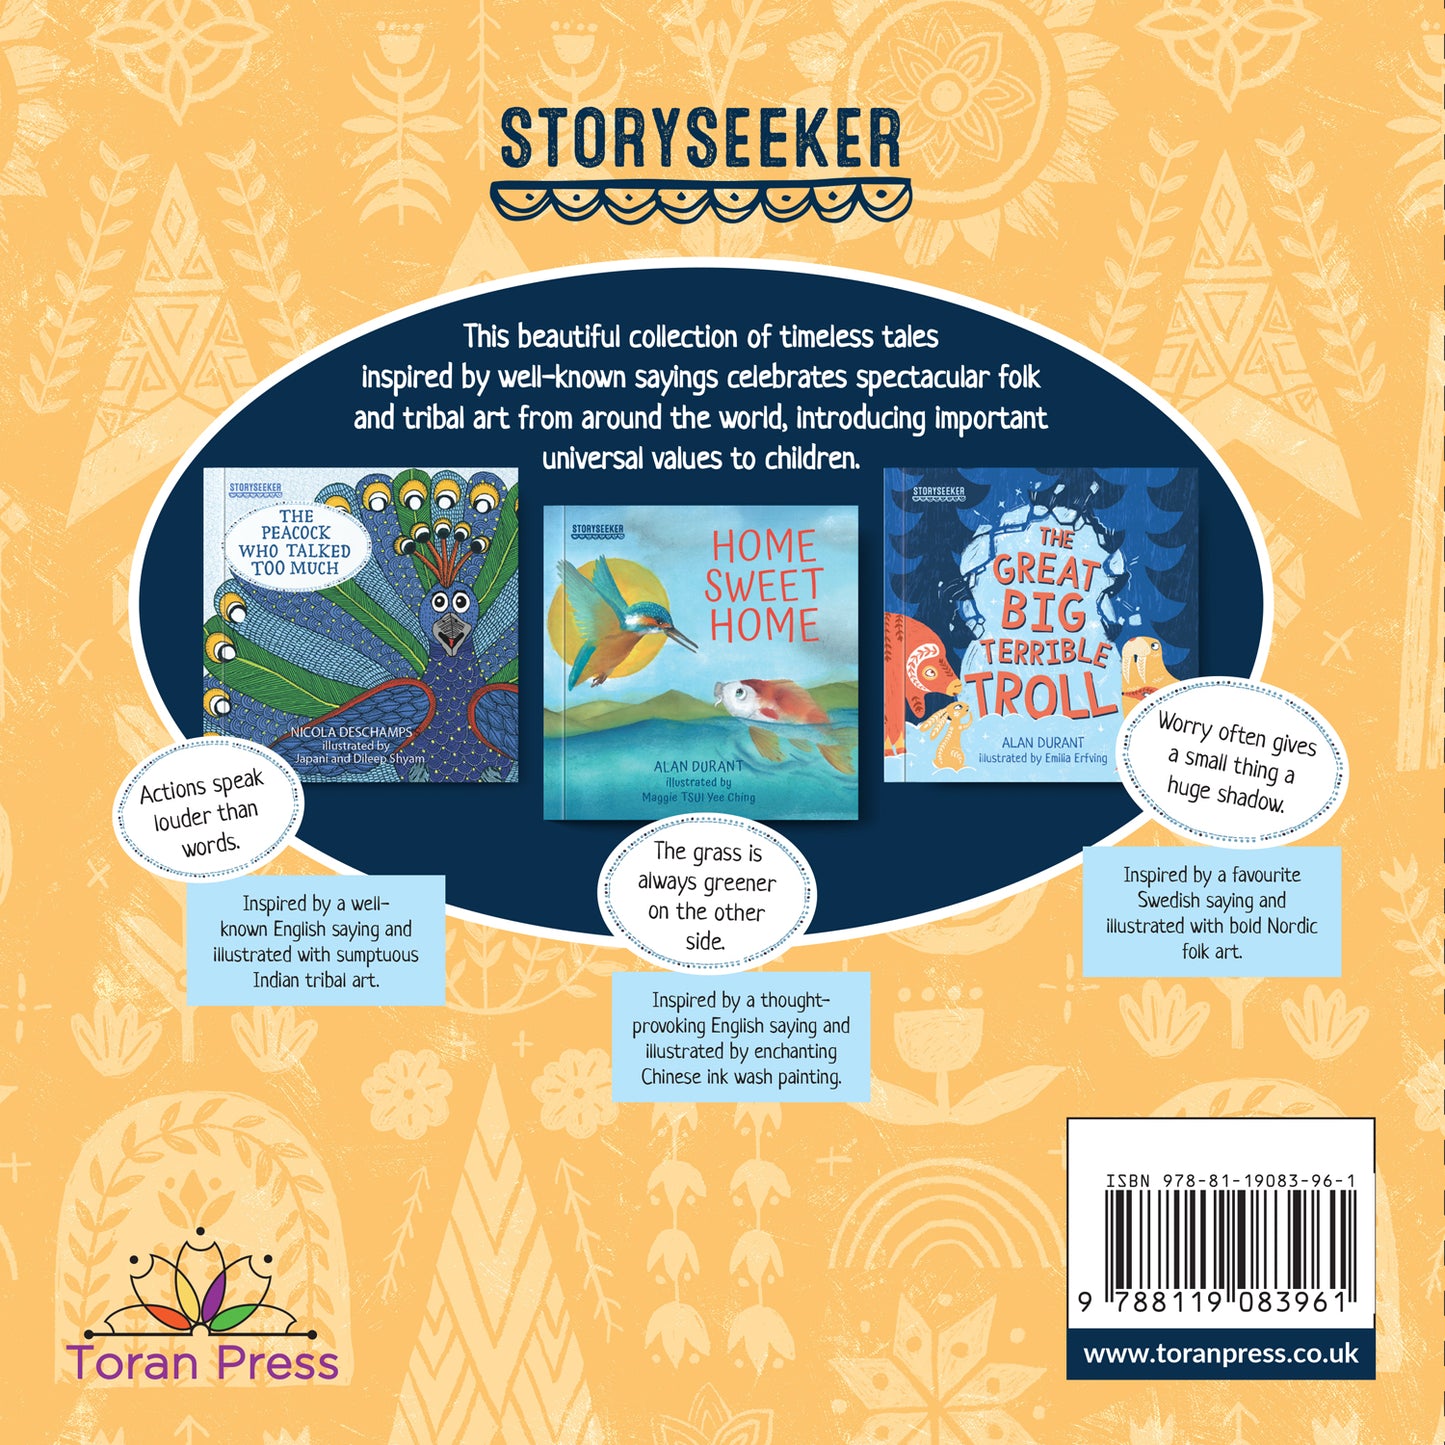 Storyseeker Box Set | Story Collection | Home Sweet Home | The Peacock who talked too much | The Great Big Terrible Troll | Toral Press | Set of  3 books